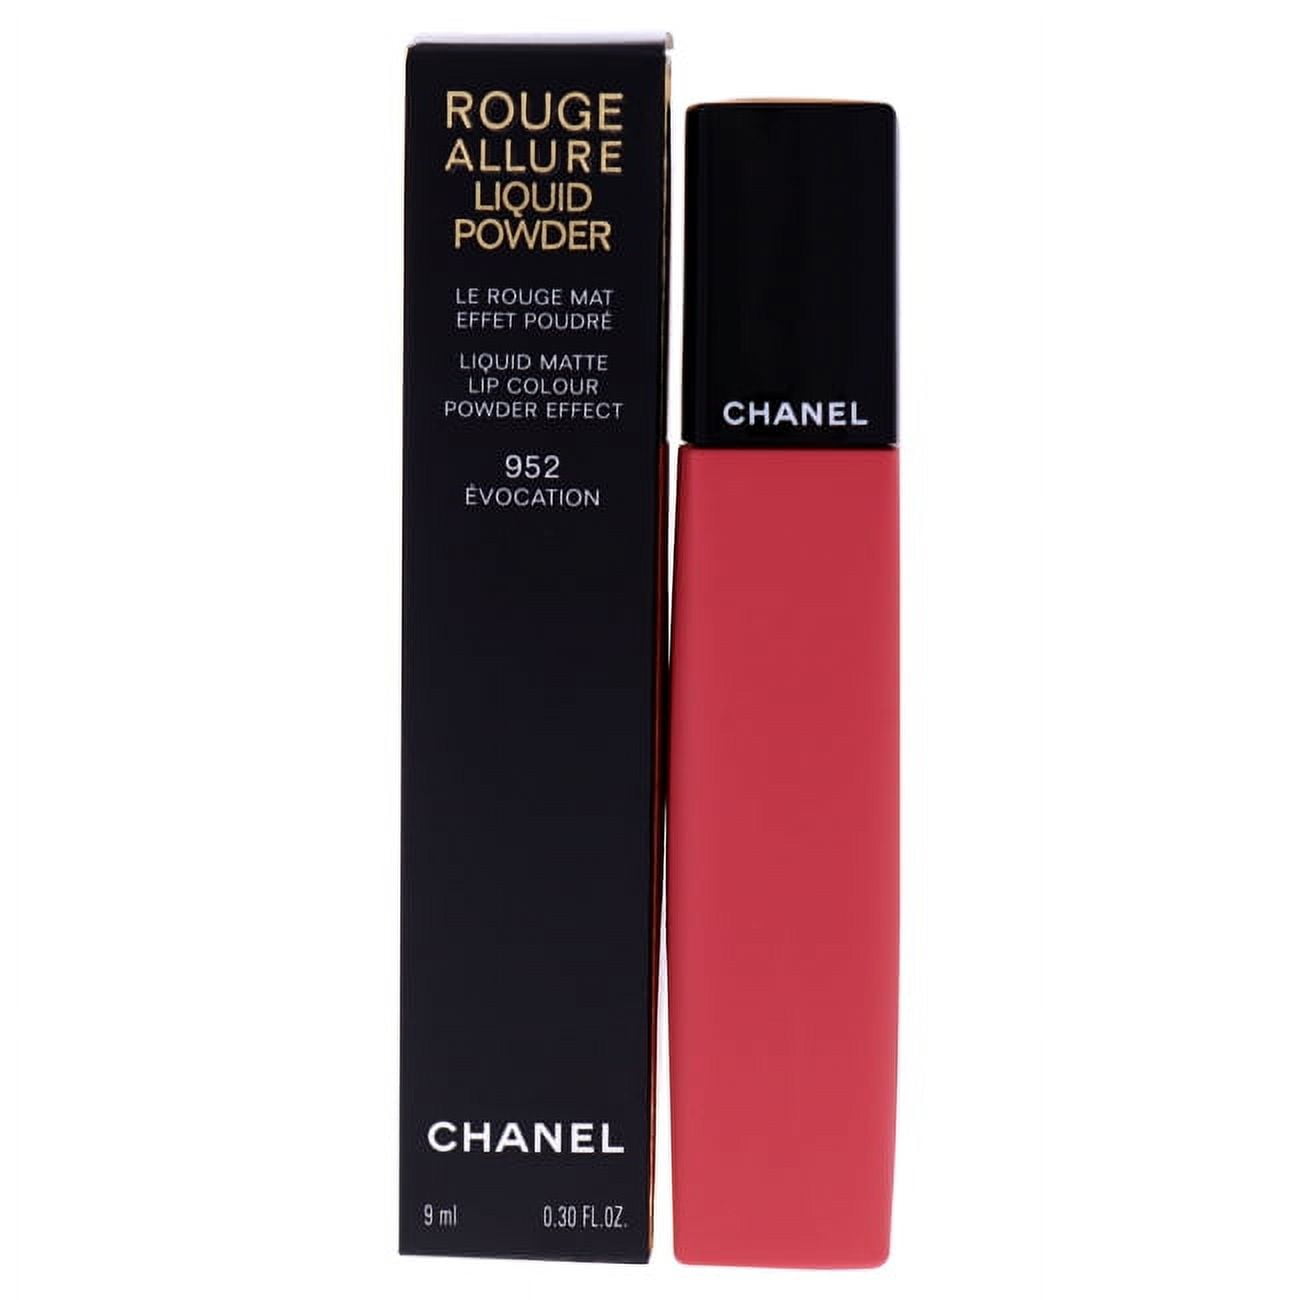 Rouge Allure Liquid Powder - 952 Evocation by Chanel for Women - 0.3 oz  Lipstick